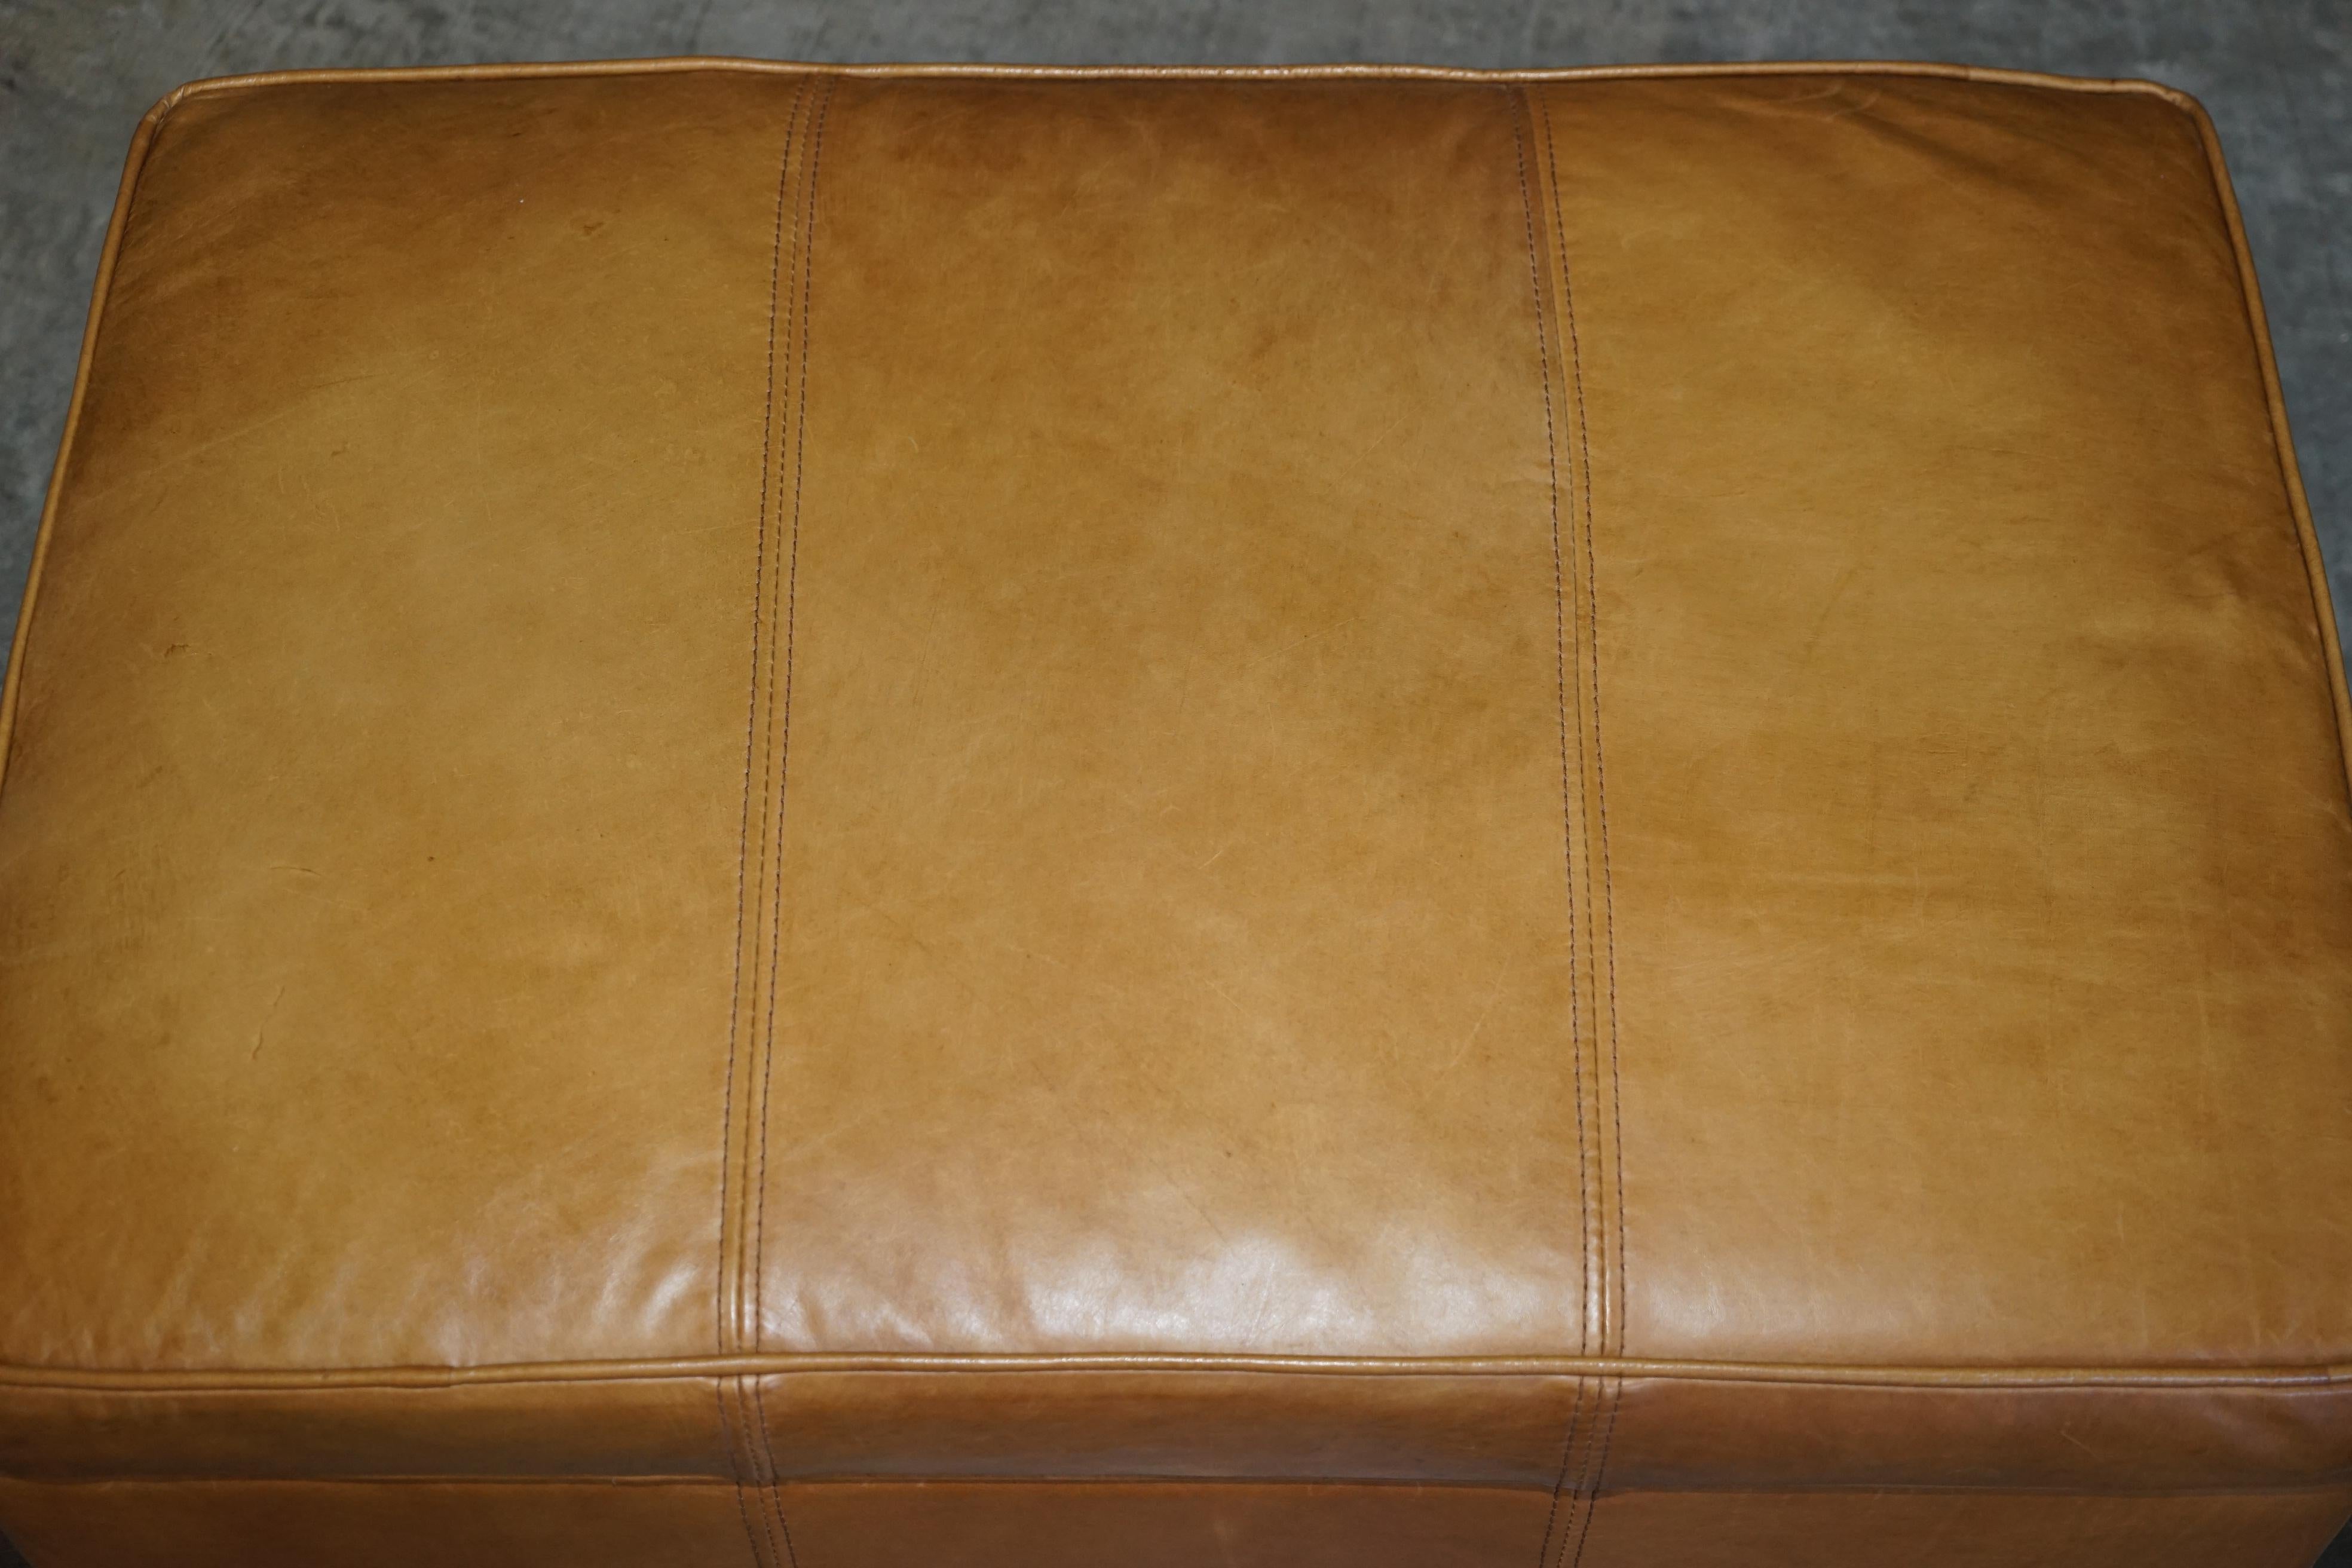 English Halo Grouch Reggio Tan Brown Leather Large Ottoman Footstool for Four to Share